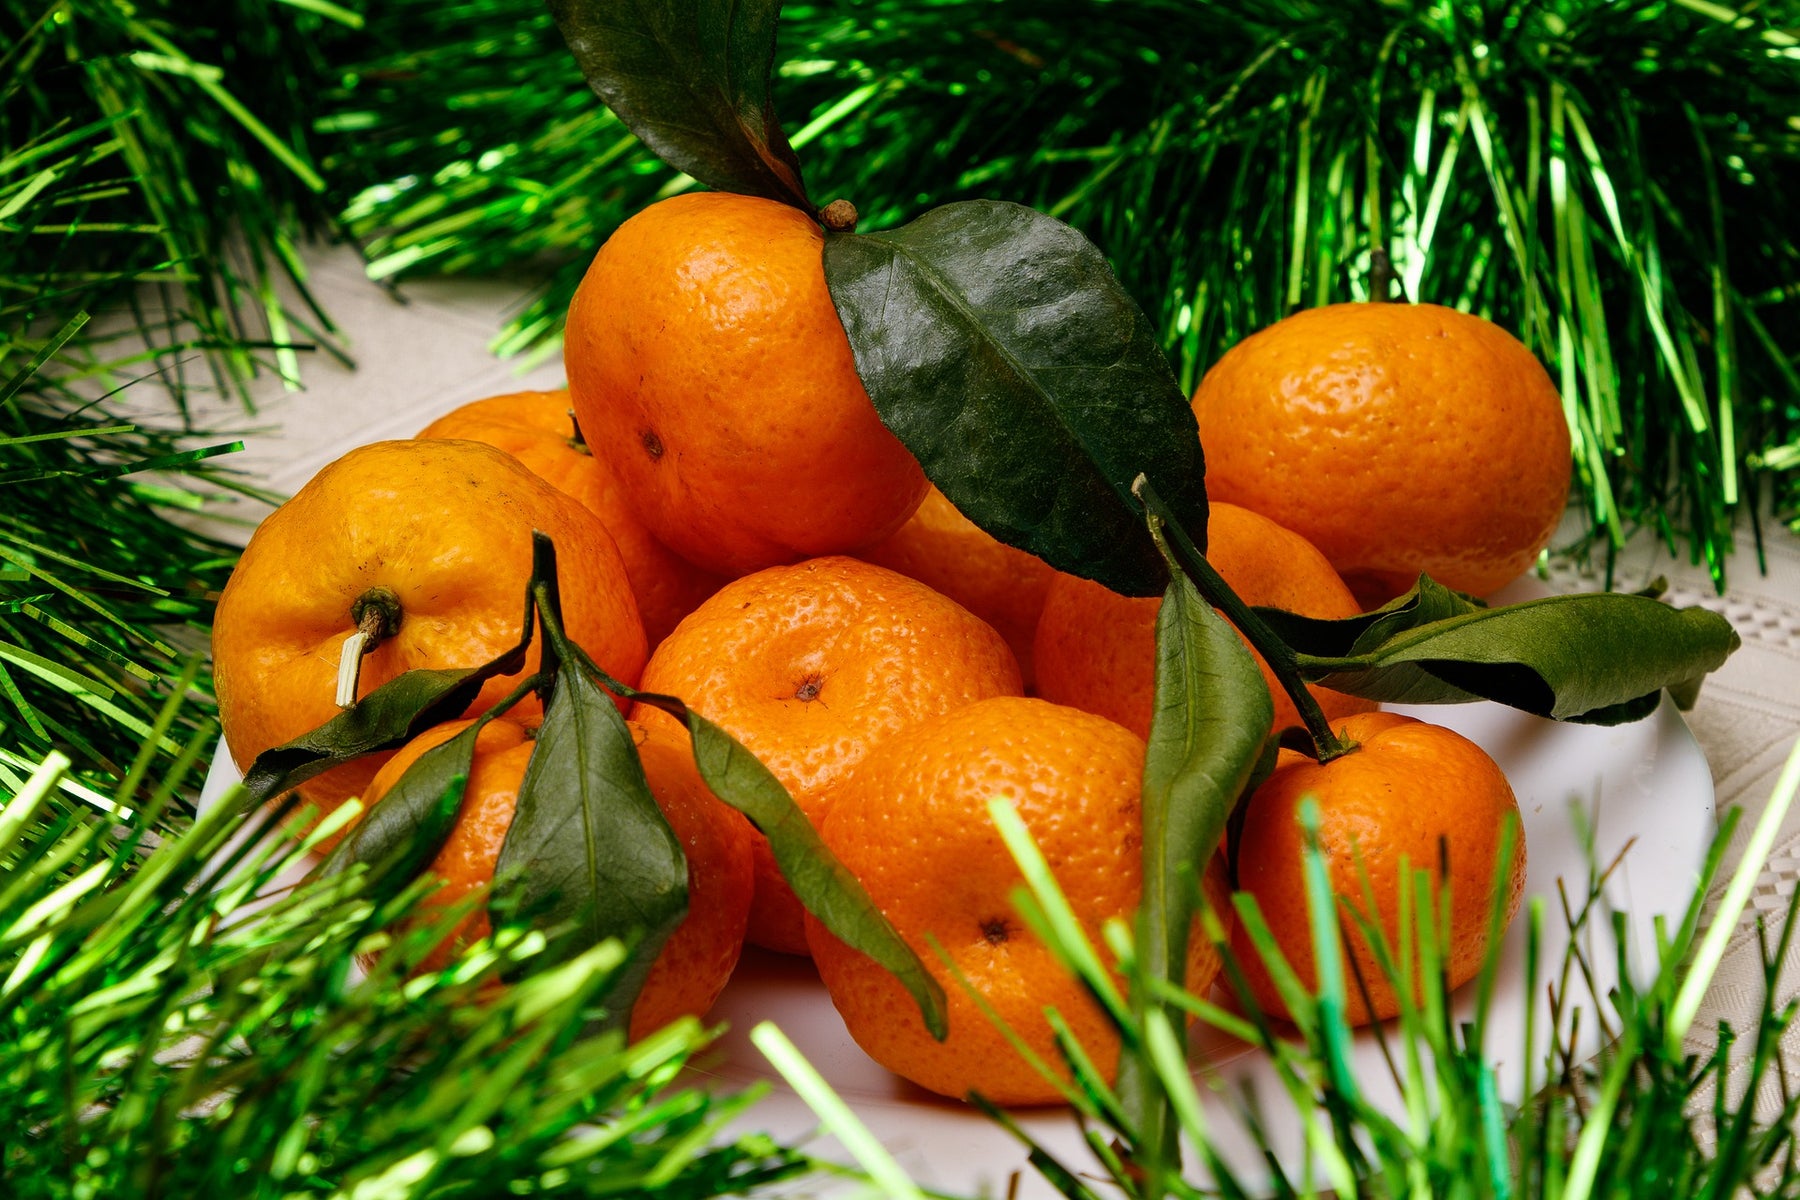 Clementines next to a leaves of a Christmas tree